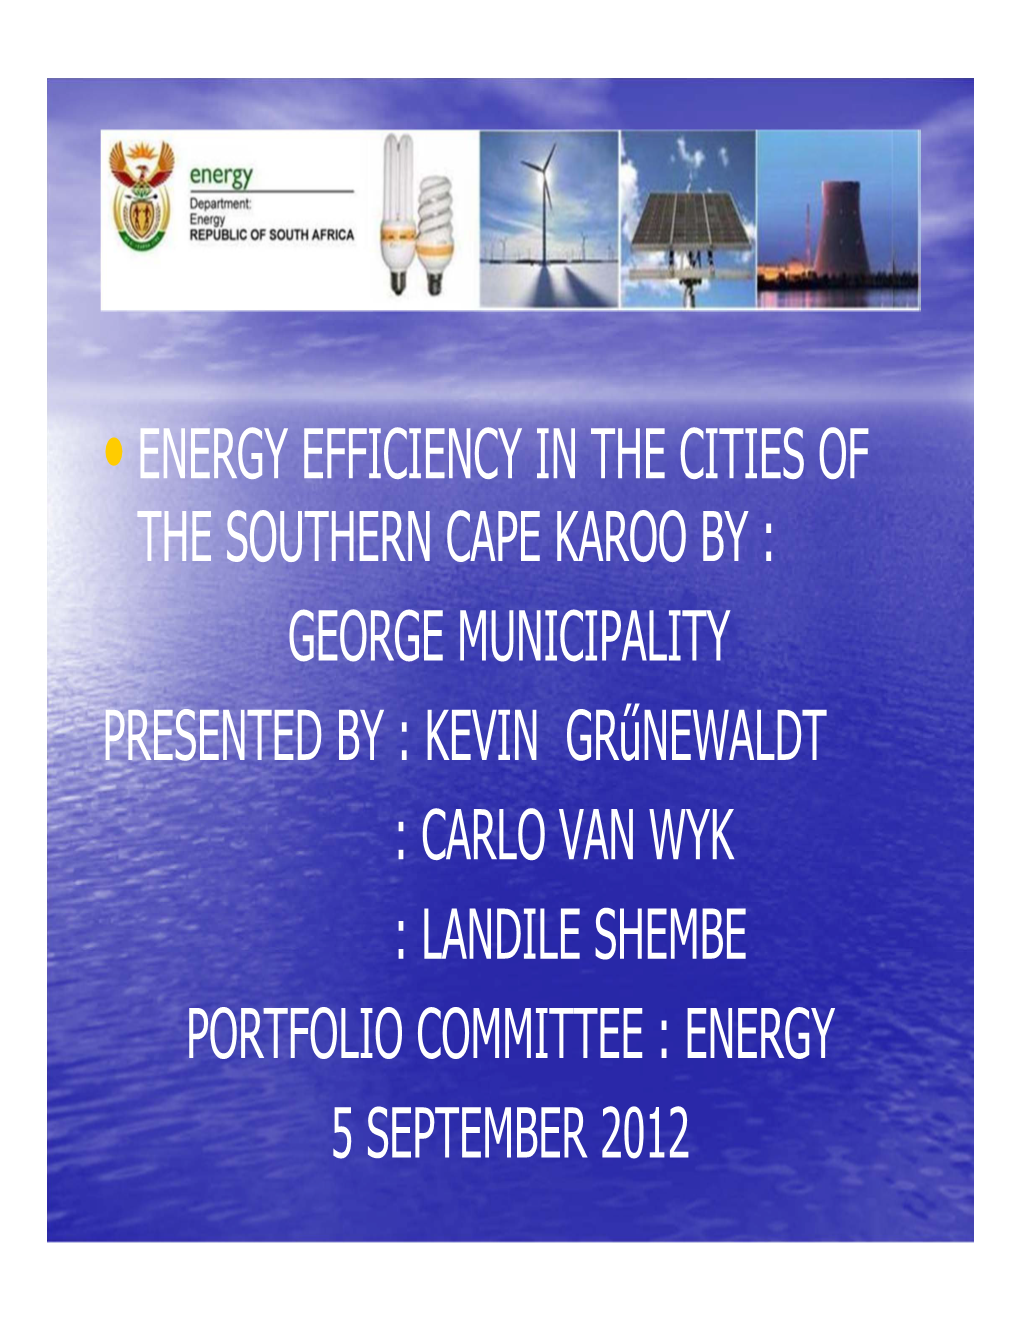 George Municipality Submission on Energy Efficiency